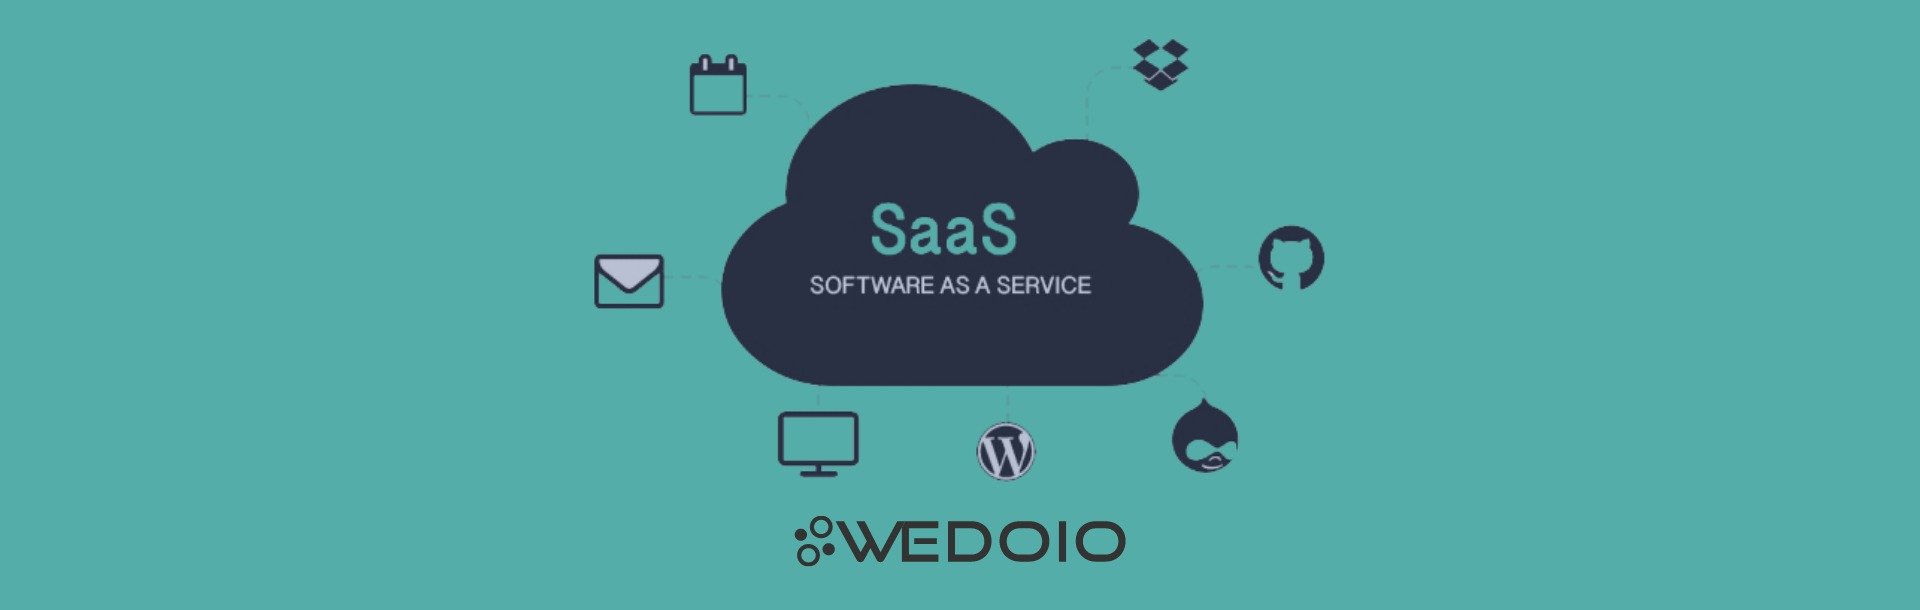 What is SaaS and how does it work?